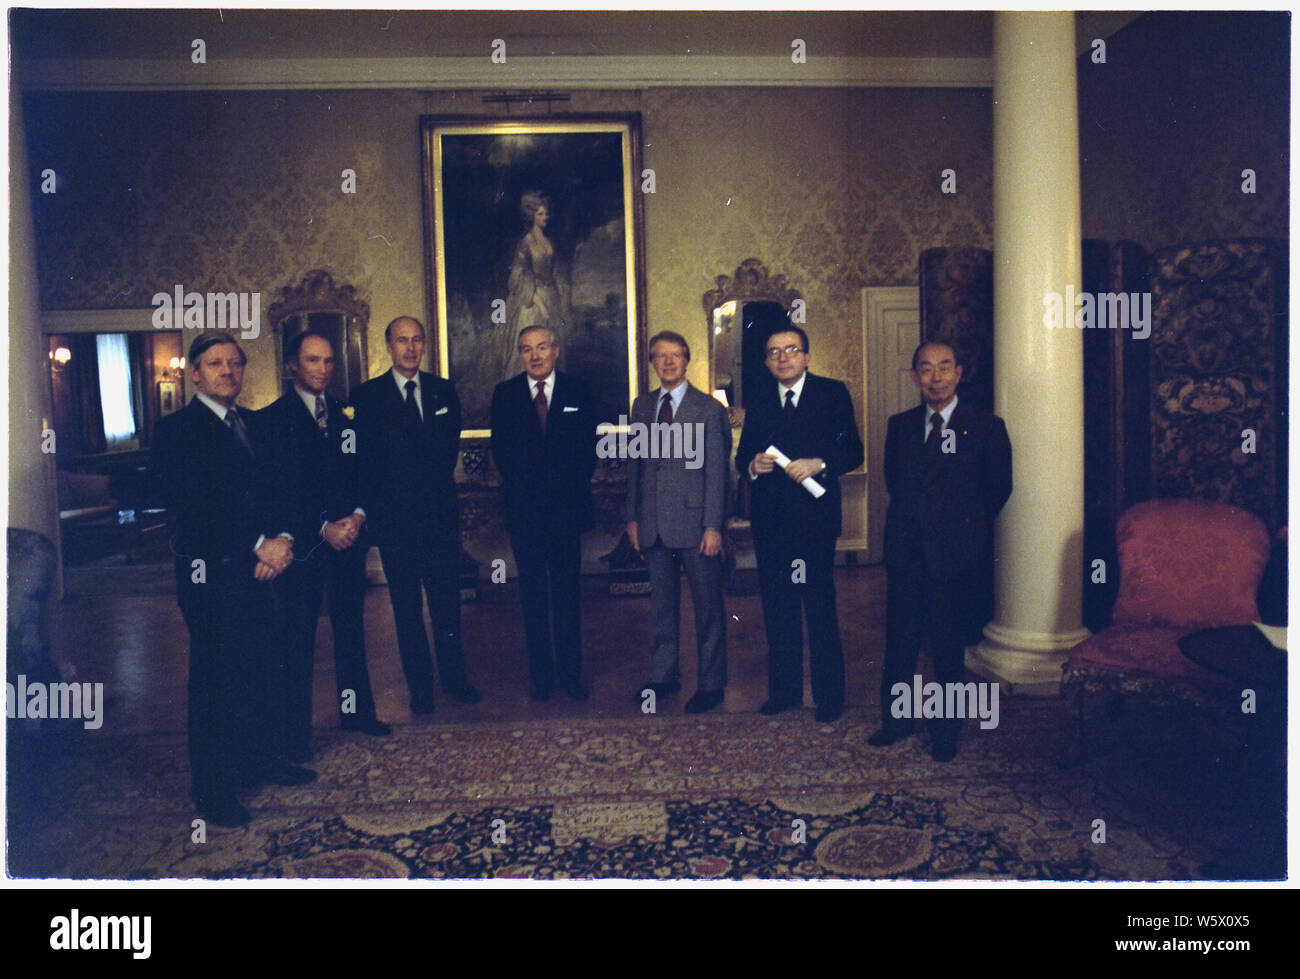 Portrait of G7 leaders, Helmut Schmidt, Pierre Trudeau, Valery Giscard d'Estaing, James Callaghan, Jimmy Carter, Giulio Andreotti and Takeo Fukuda. Stock Photo